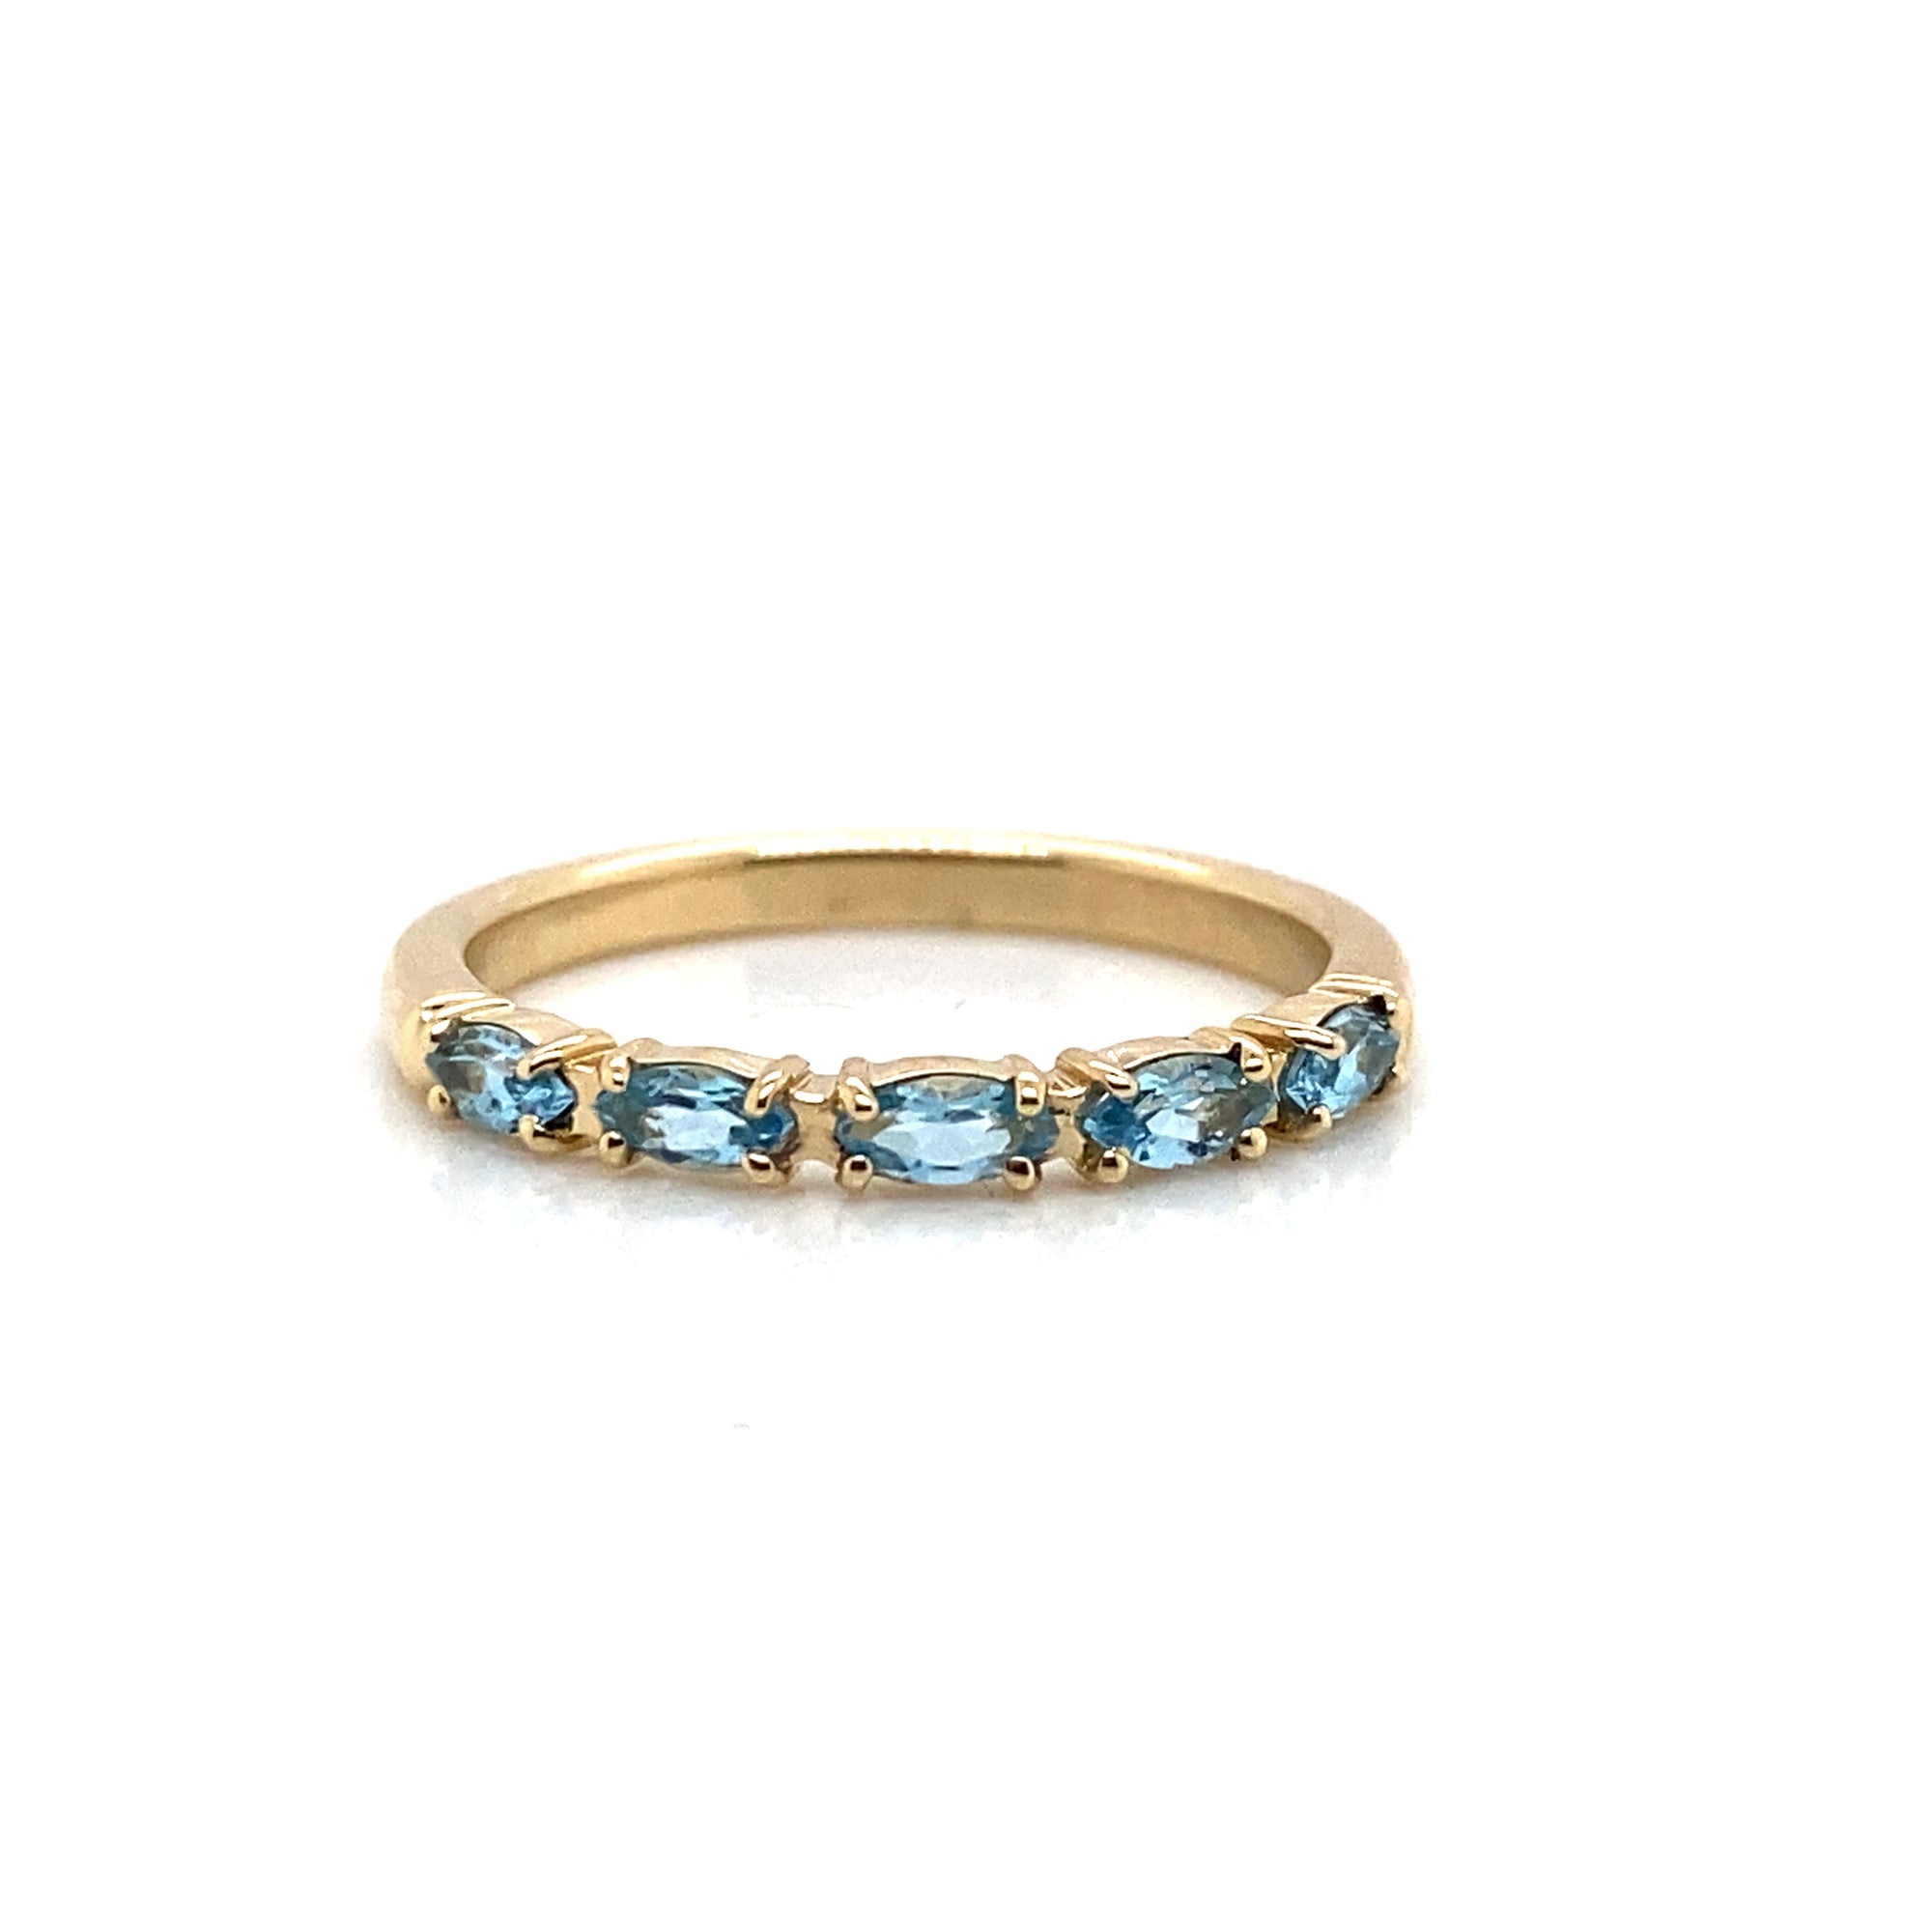 14K Yellow Gold Blue Topaz Marquise Cut Ring